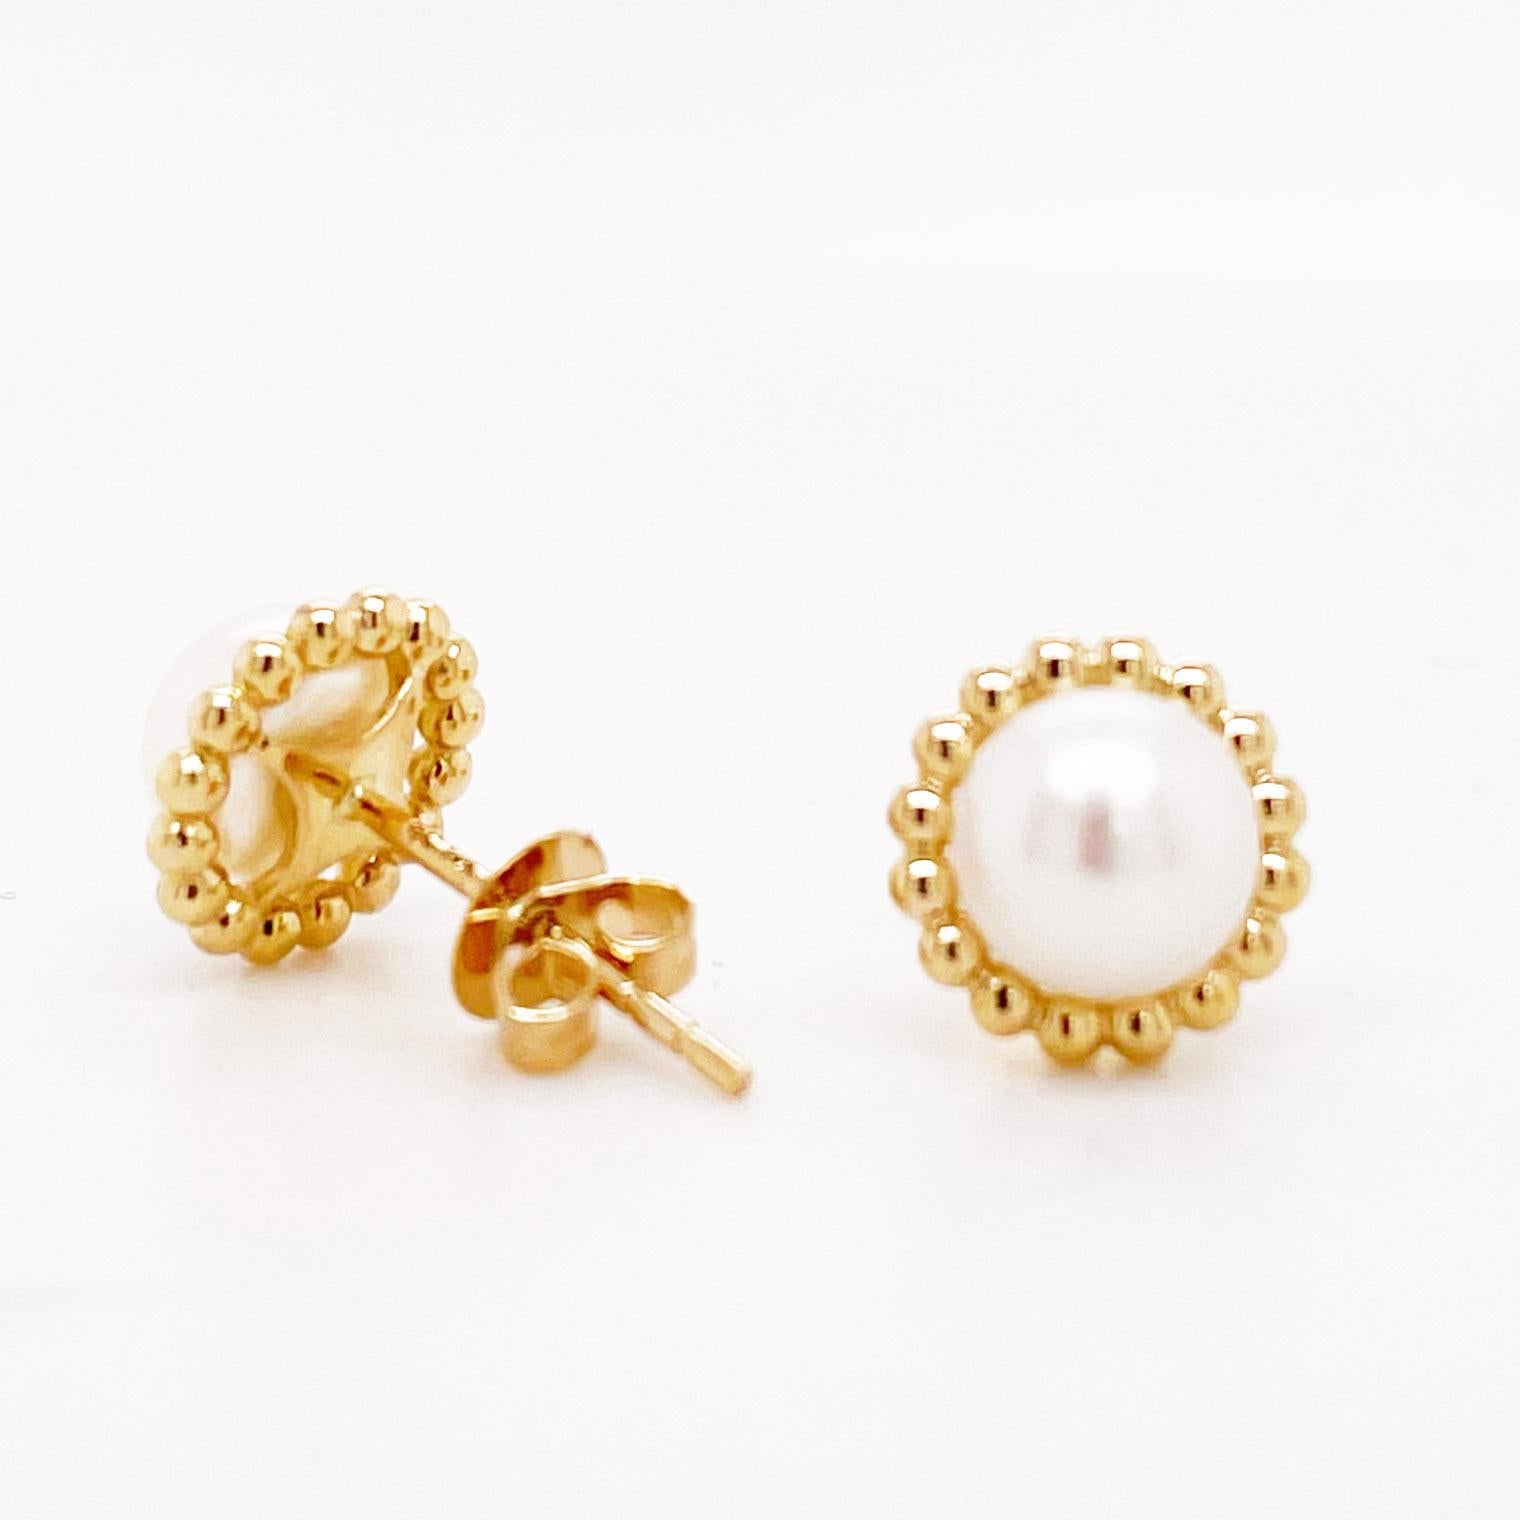 2022 Best Selling Pearl Earrings! Add a little pizazz to your pearl jewelry with this beaded frame pearl earring. The touch of solid 14 karat yellow gold adds a lot to the design. These are the perfect earrings for a gift! The details for these